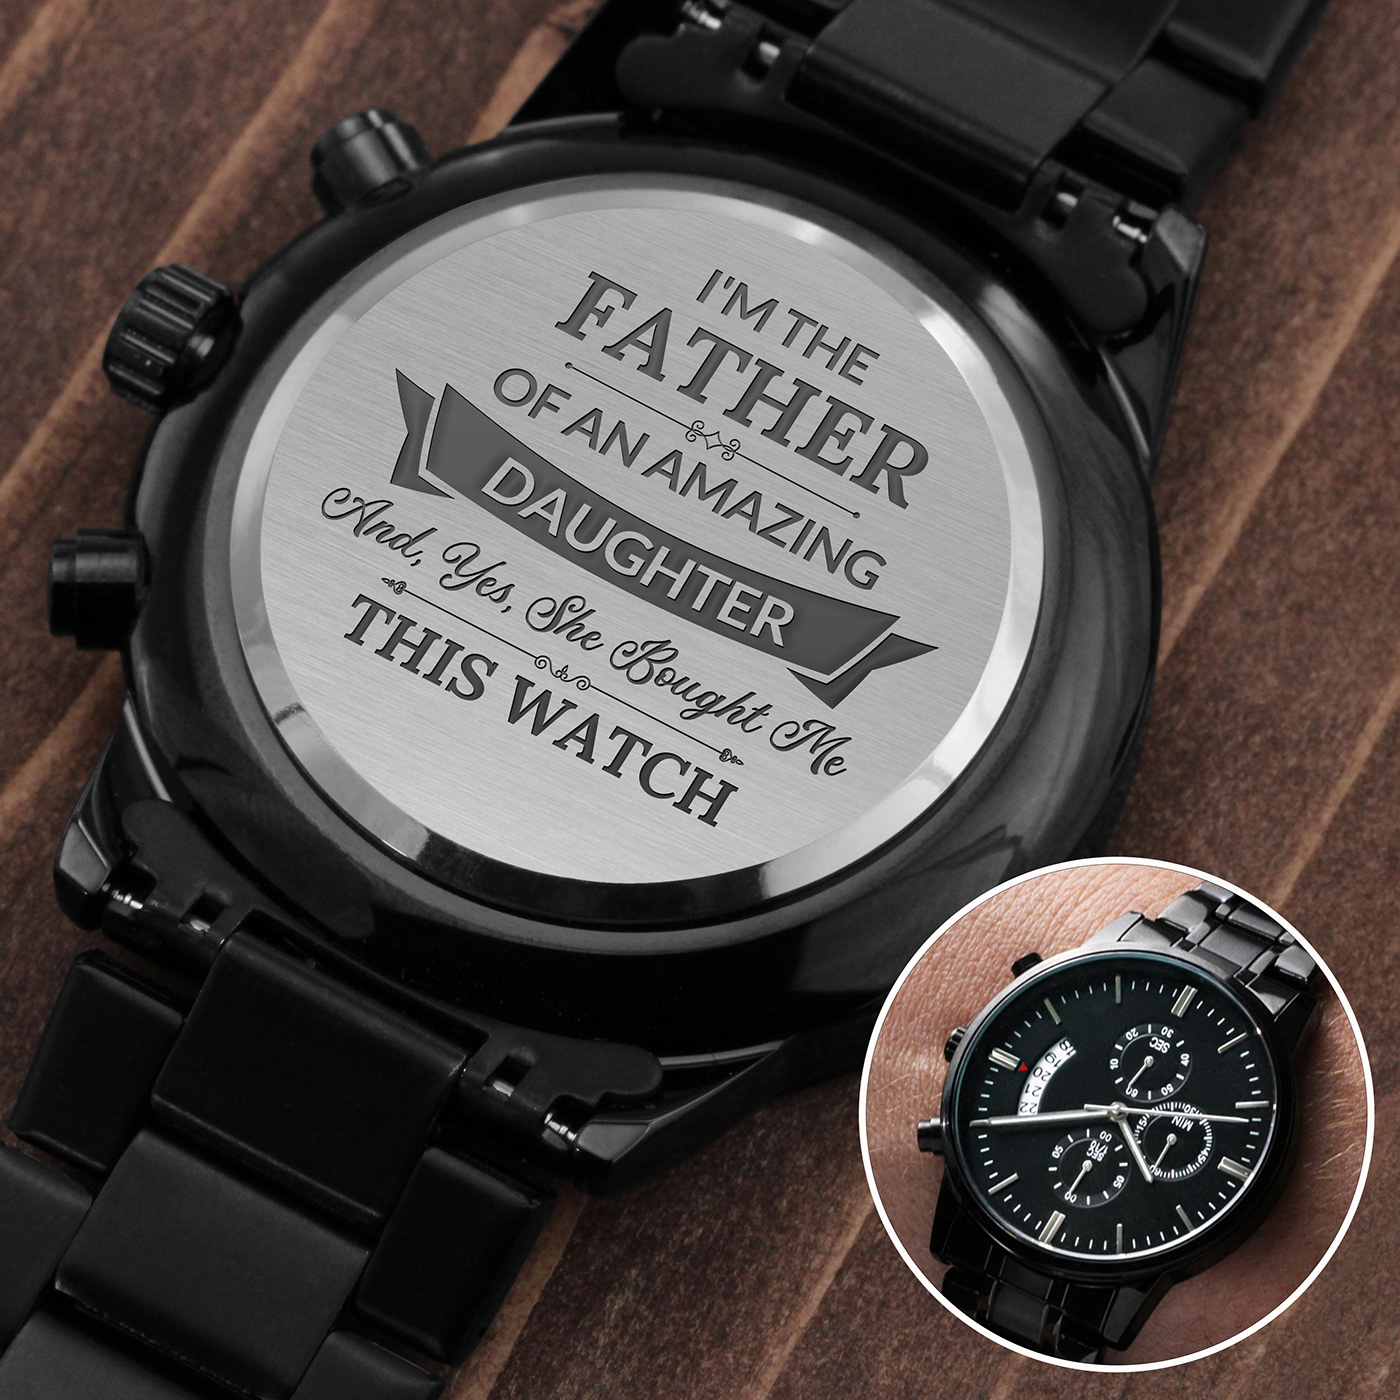 dad dog tag Father's Day gearbubble jewelry Mens Watch message card design pendant Dasign SHINEON   watch design